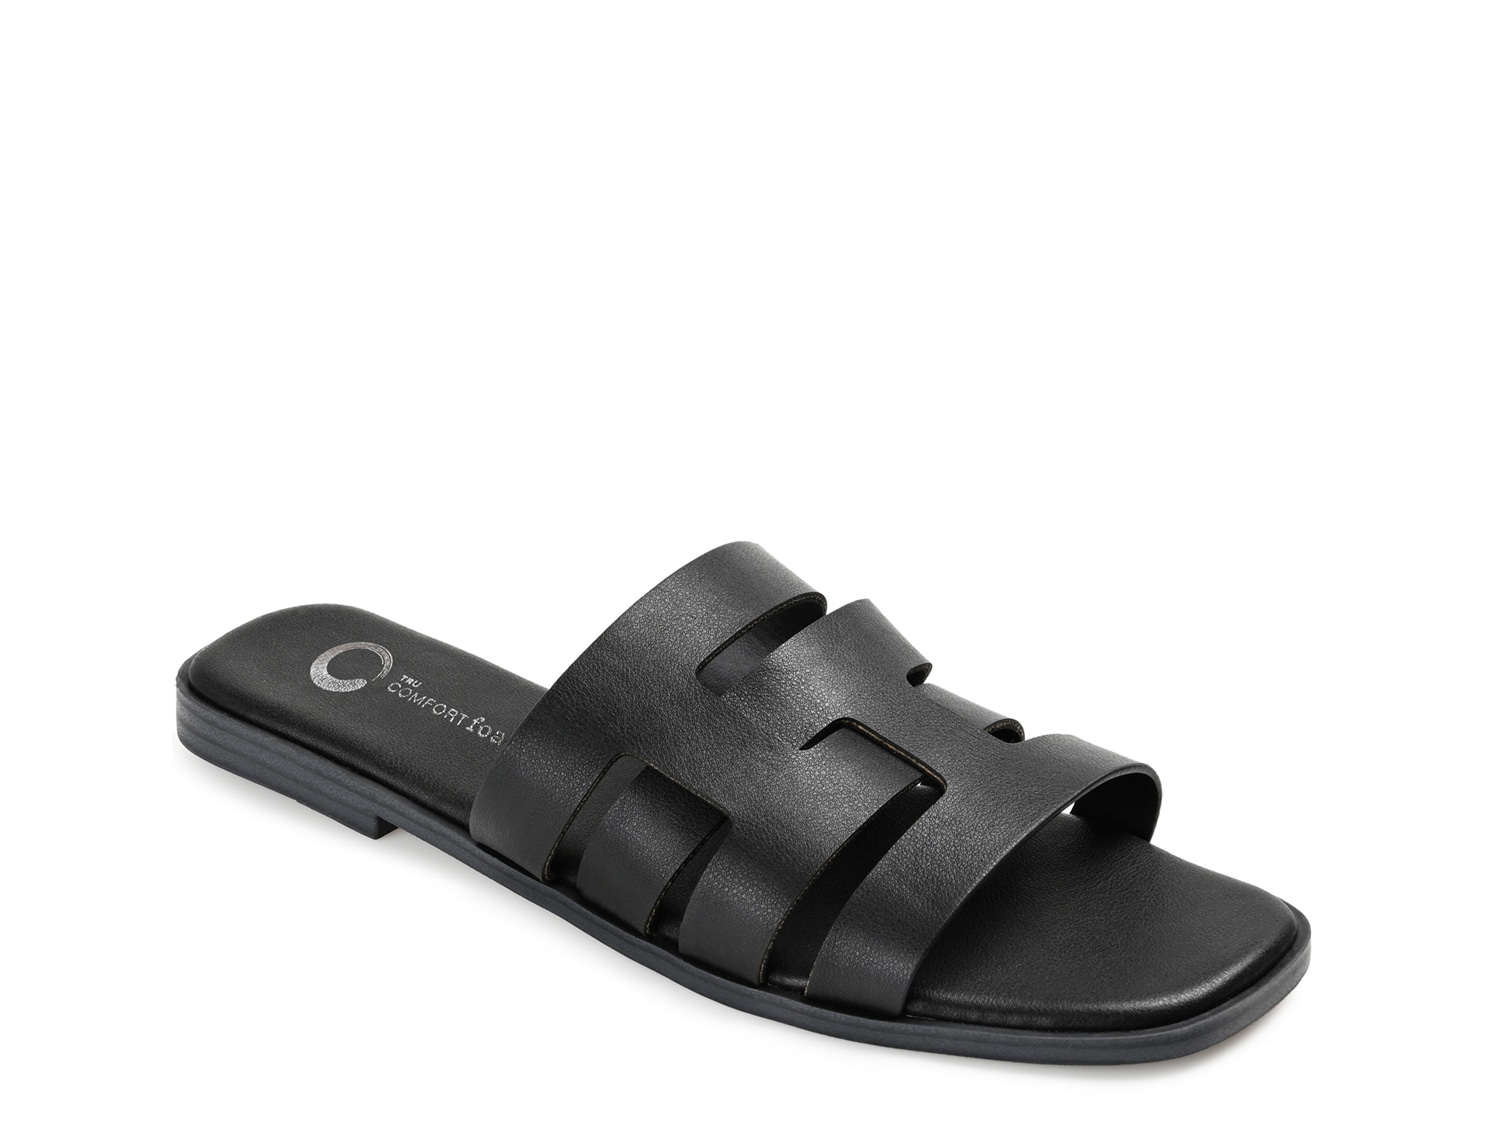 Journee Collection Sidnie Sandal - Free Shipping | DSW